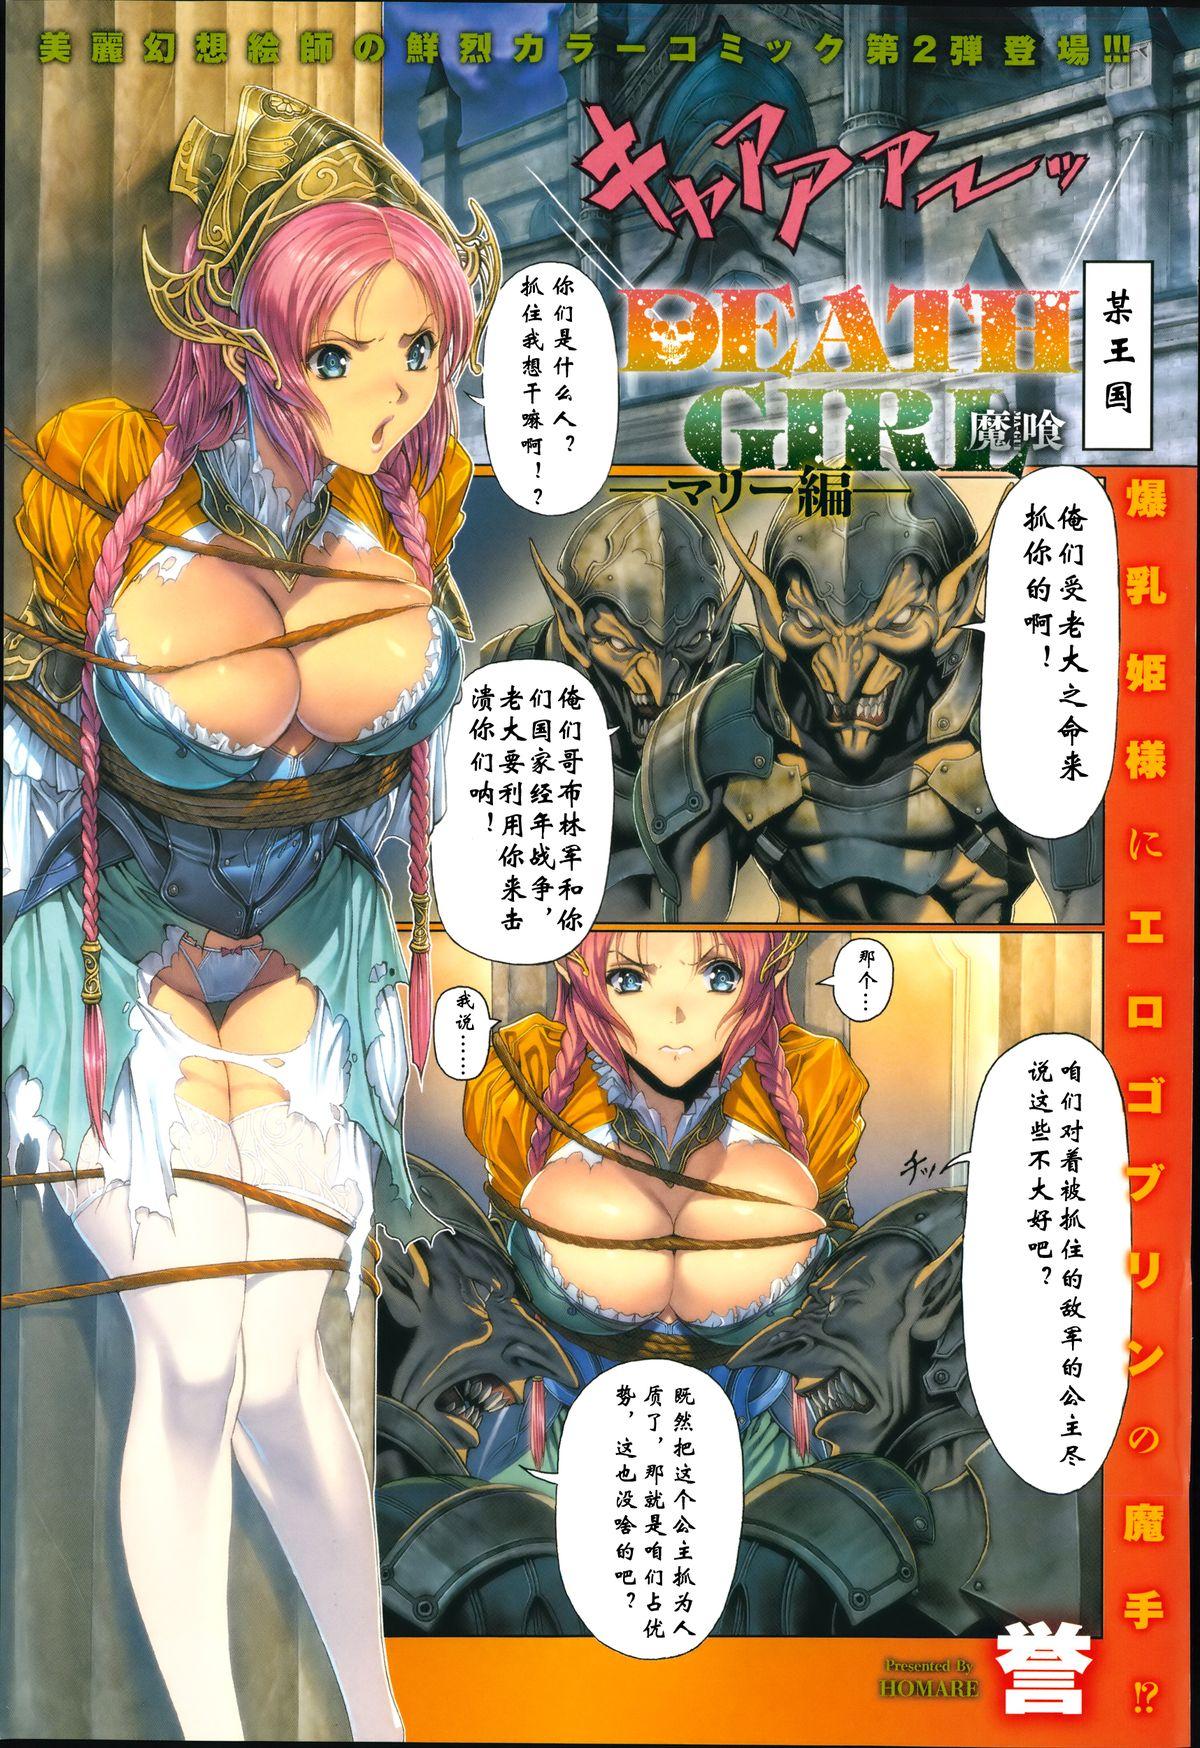 [Homare] Ma-Gui -DEATH GIRL- Marie Hen (COMIC Anthurium 018 2014-10) [Chinese] 0